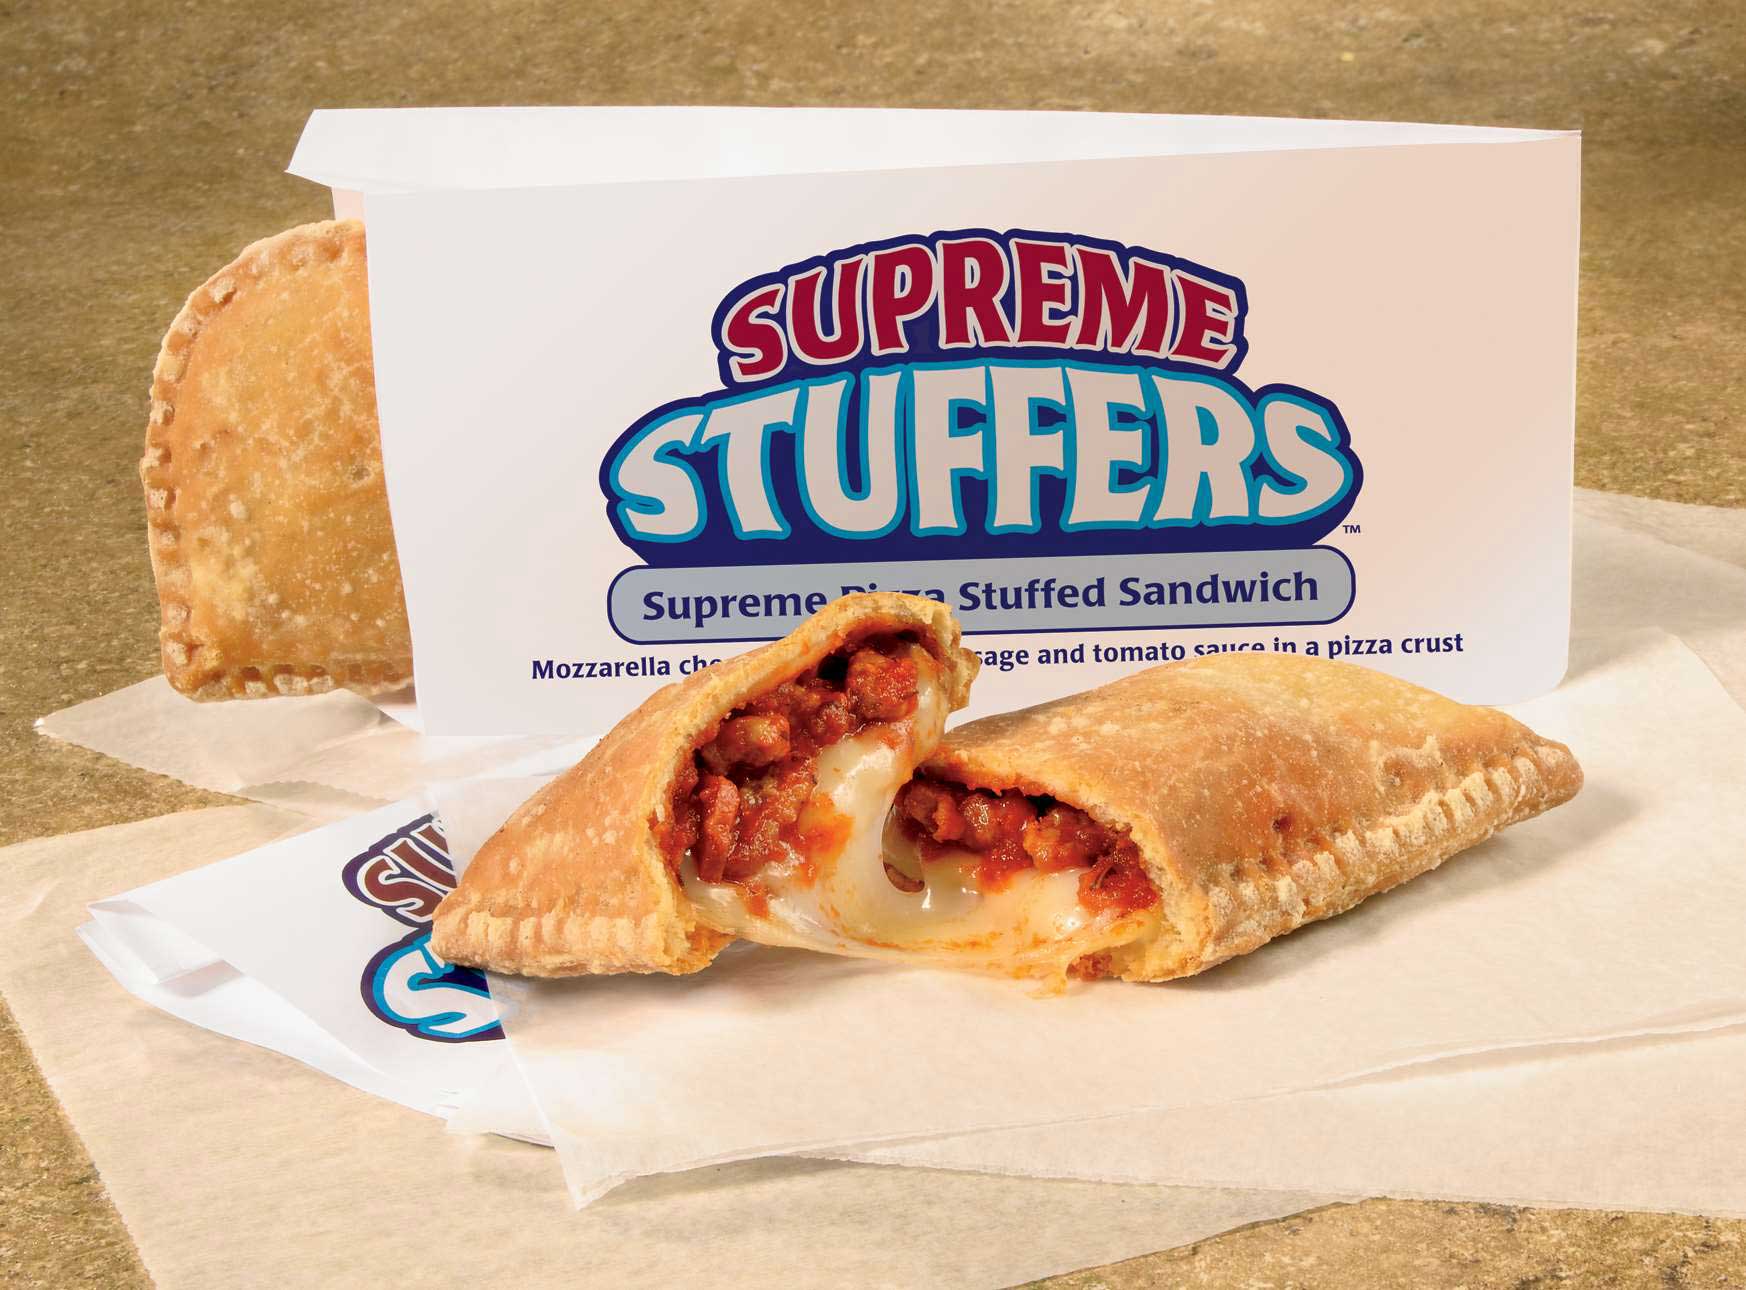 J and J Snack Supreme Stuffers Pizza with Serving Sleeve, 5 ounce -- 48 per case